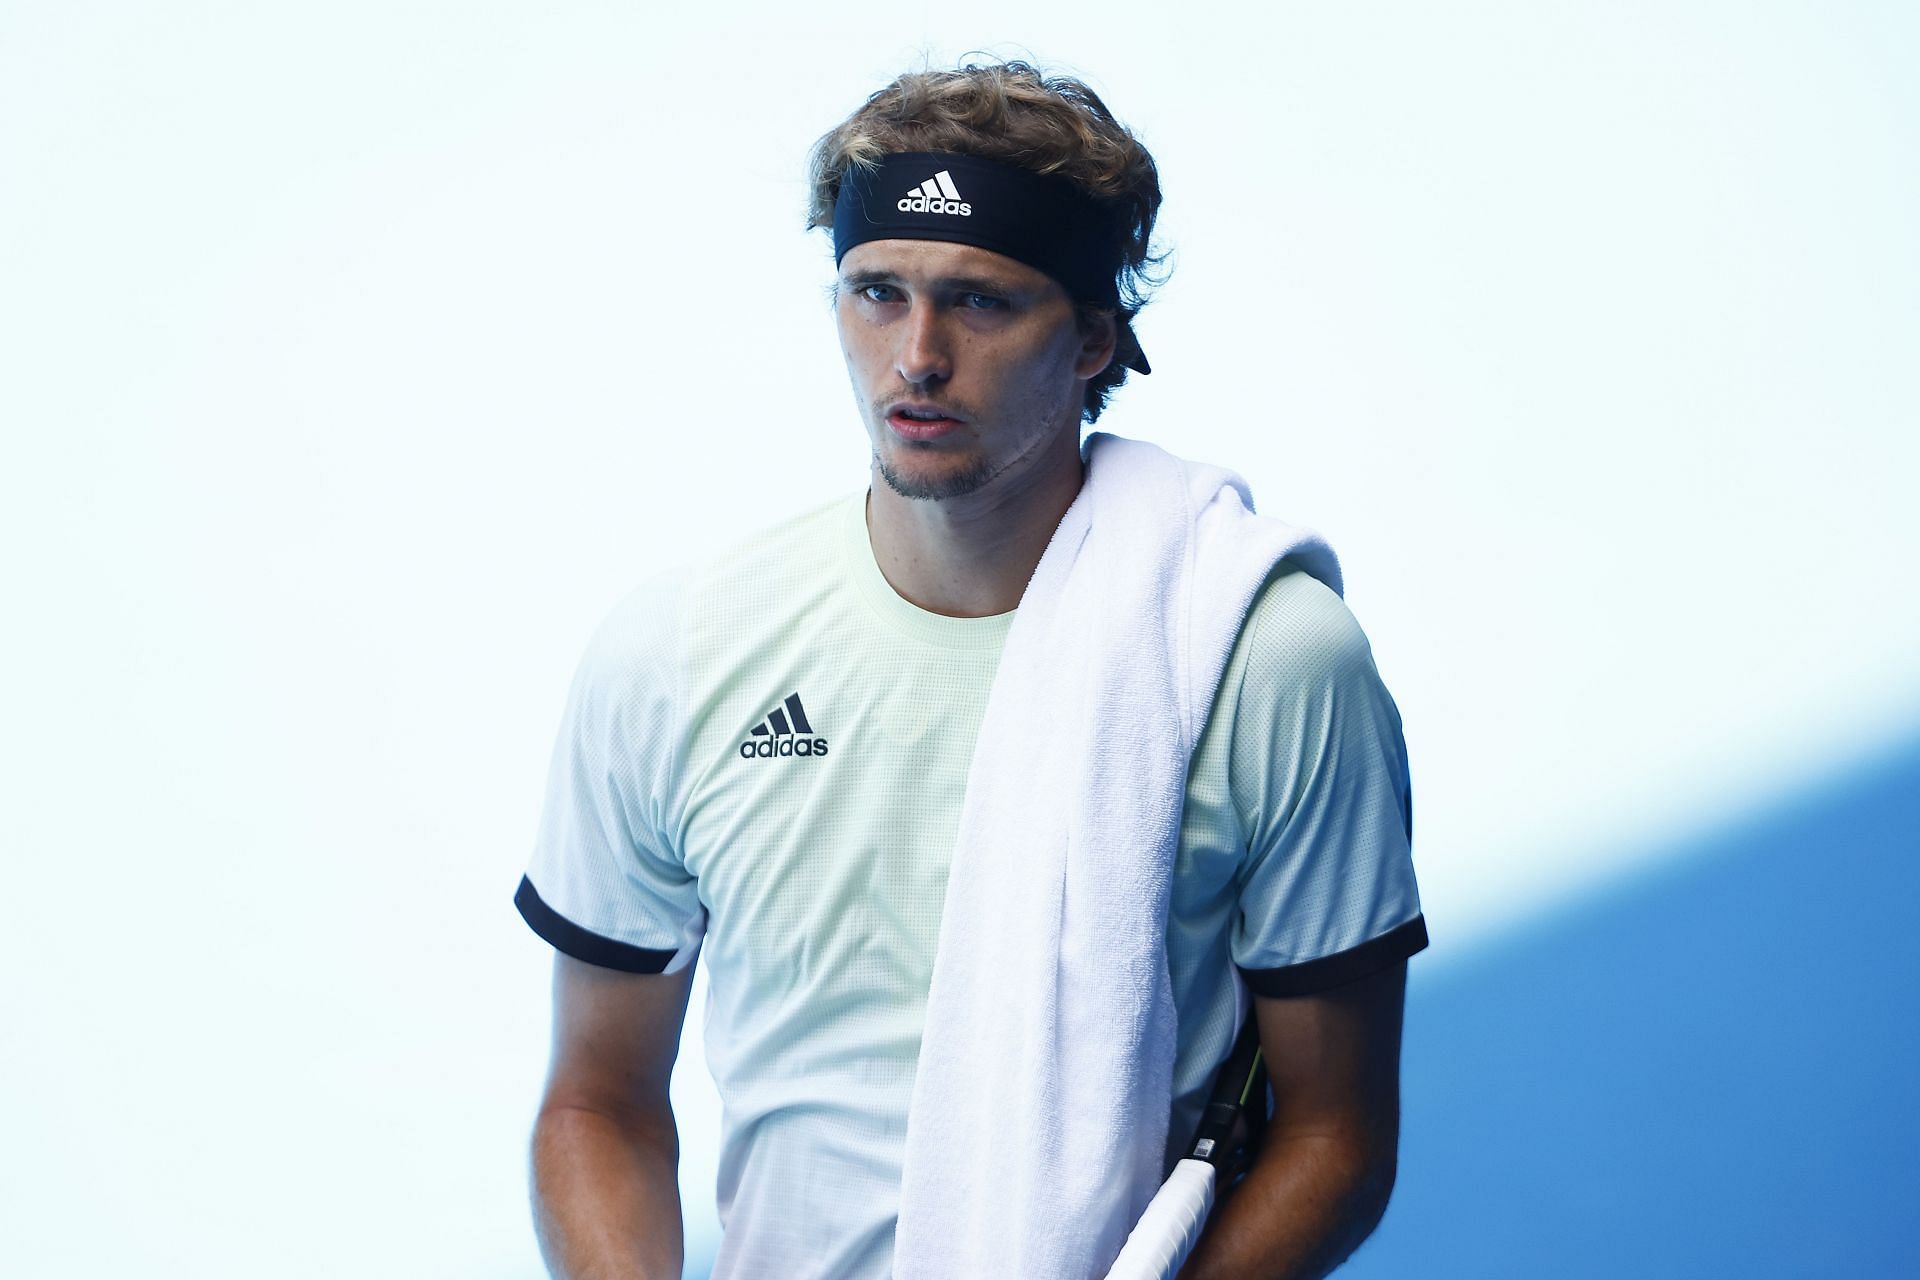 Alexander Zverev during a practice session at the 2022 Australian Open.